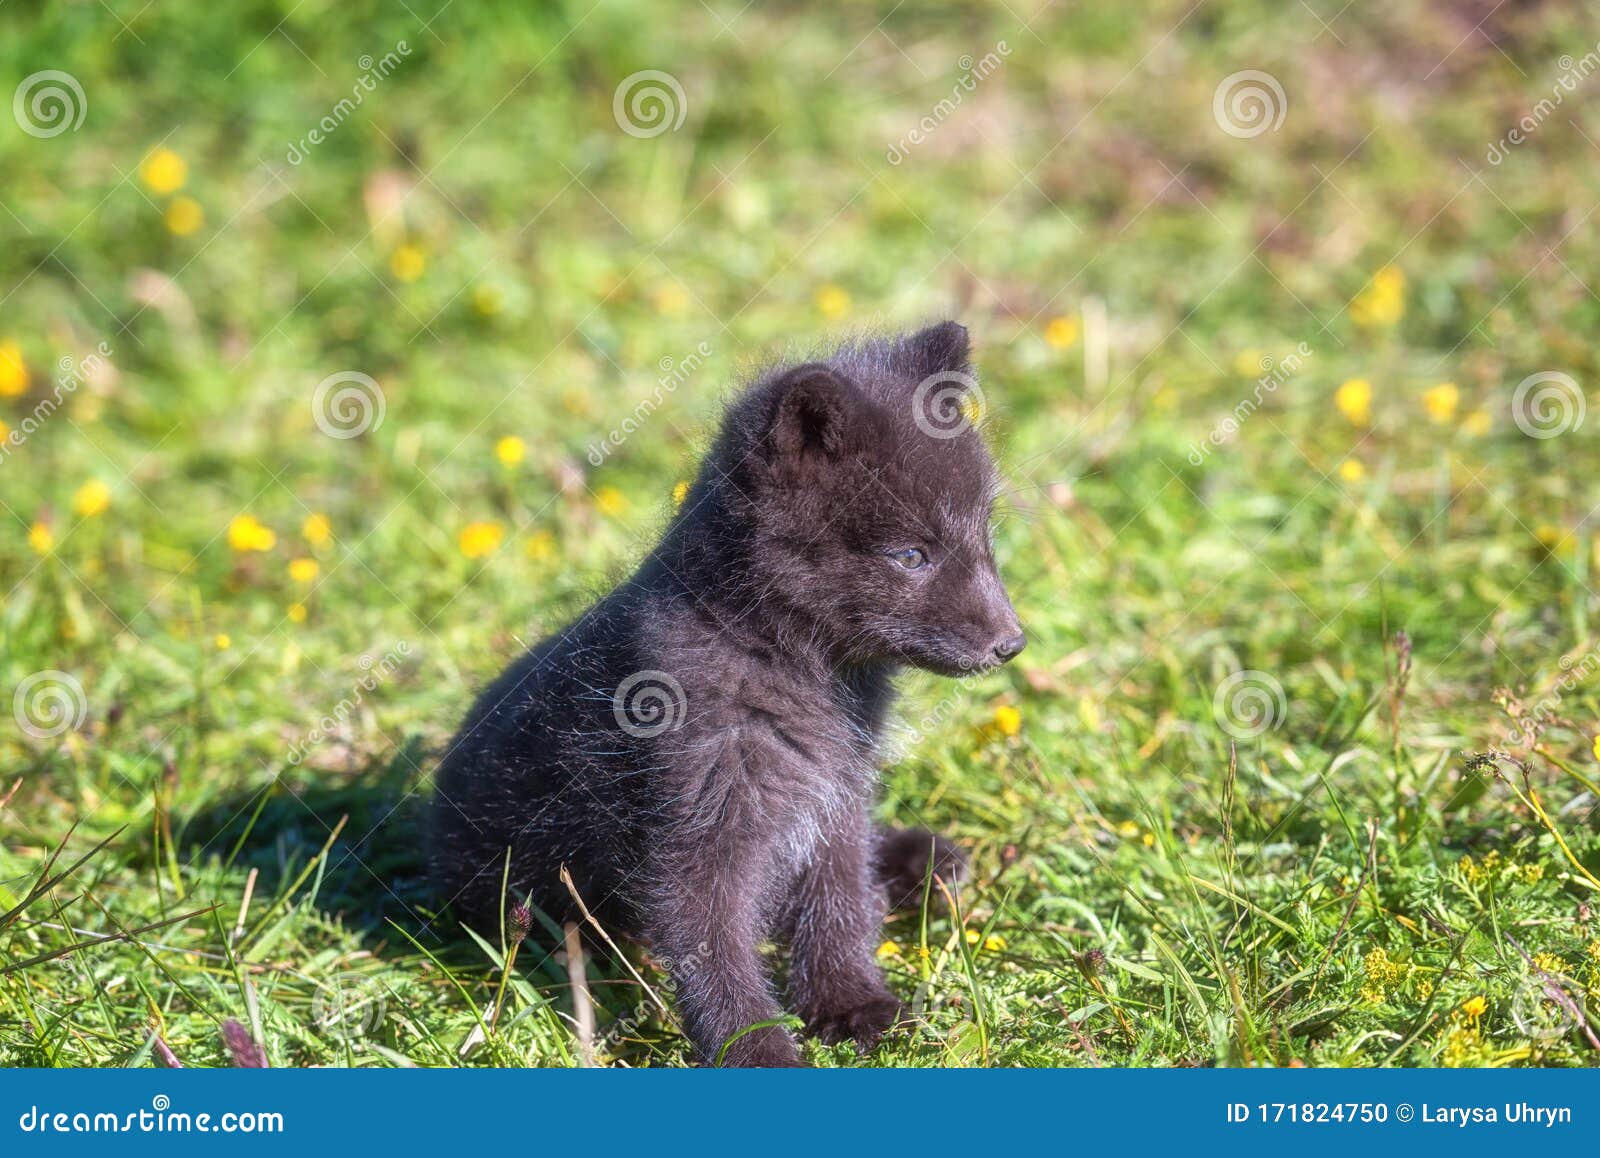 Arctic Fox Cub or Vulpes Lagopus in Natural Habitat, Cute Wild Animal Baby  Iceland Stock Photo - Image of hunter, background: 171824750